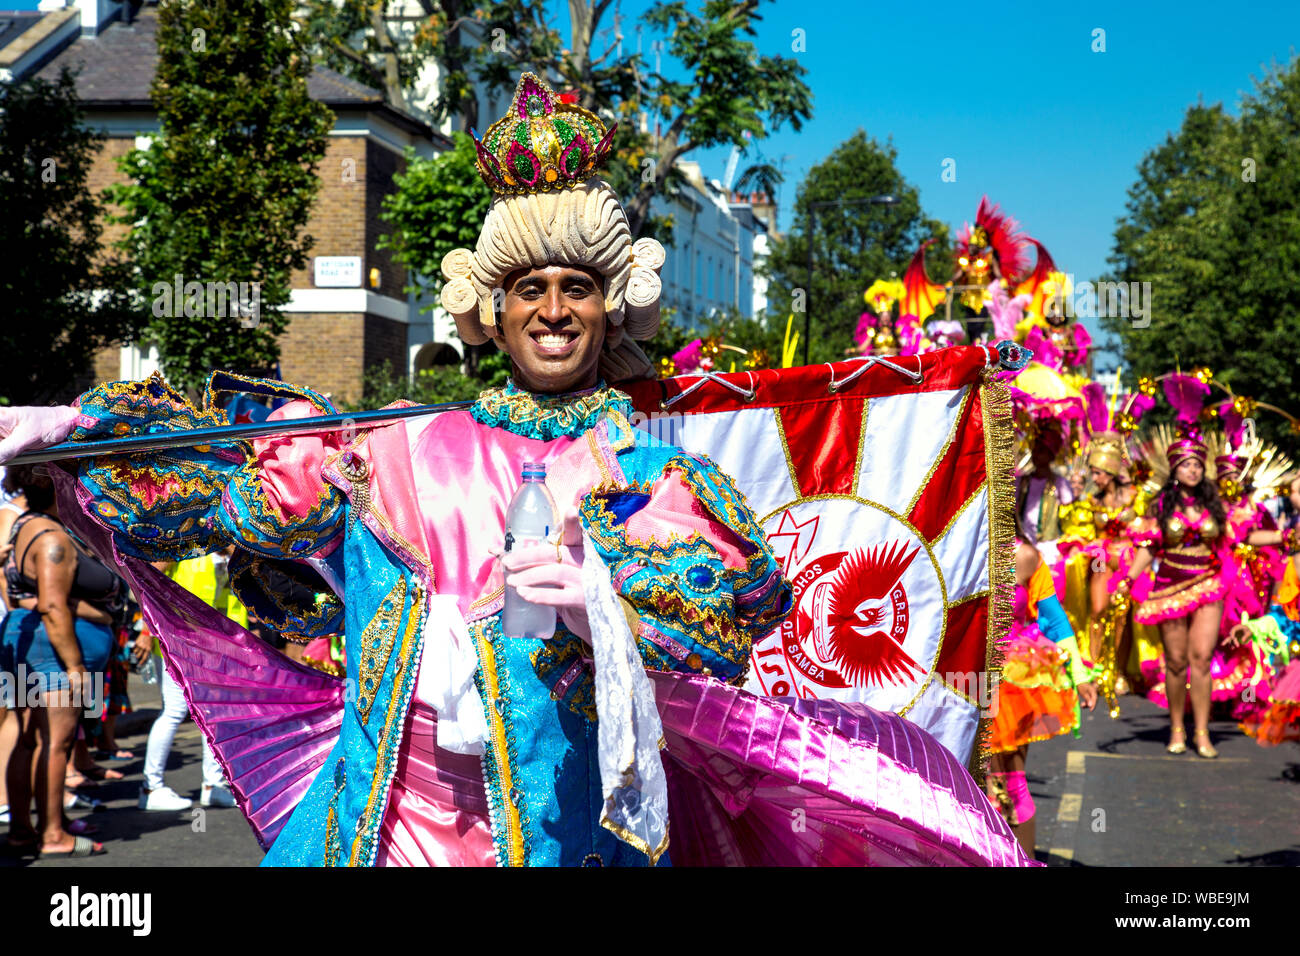 26 August 2019 - Man dressed up in a period costume with powder wig, crown and flag at Notting Hill Carnival on a hot Bank Holiday Monday, London, UK Stock Photo